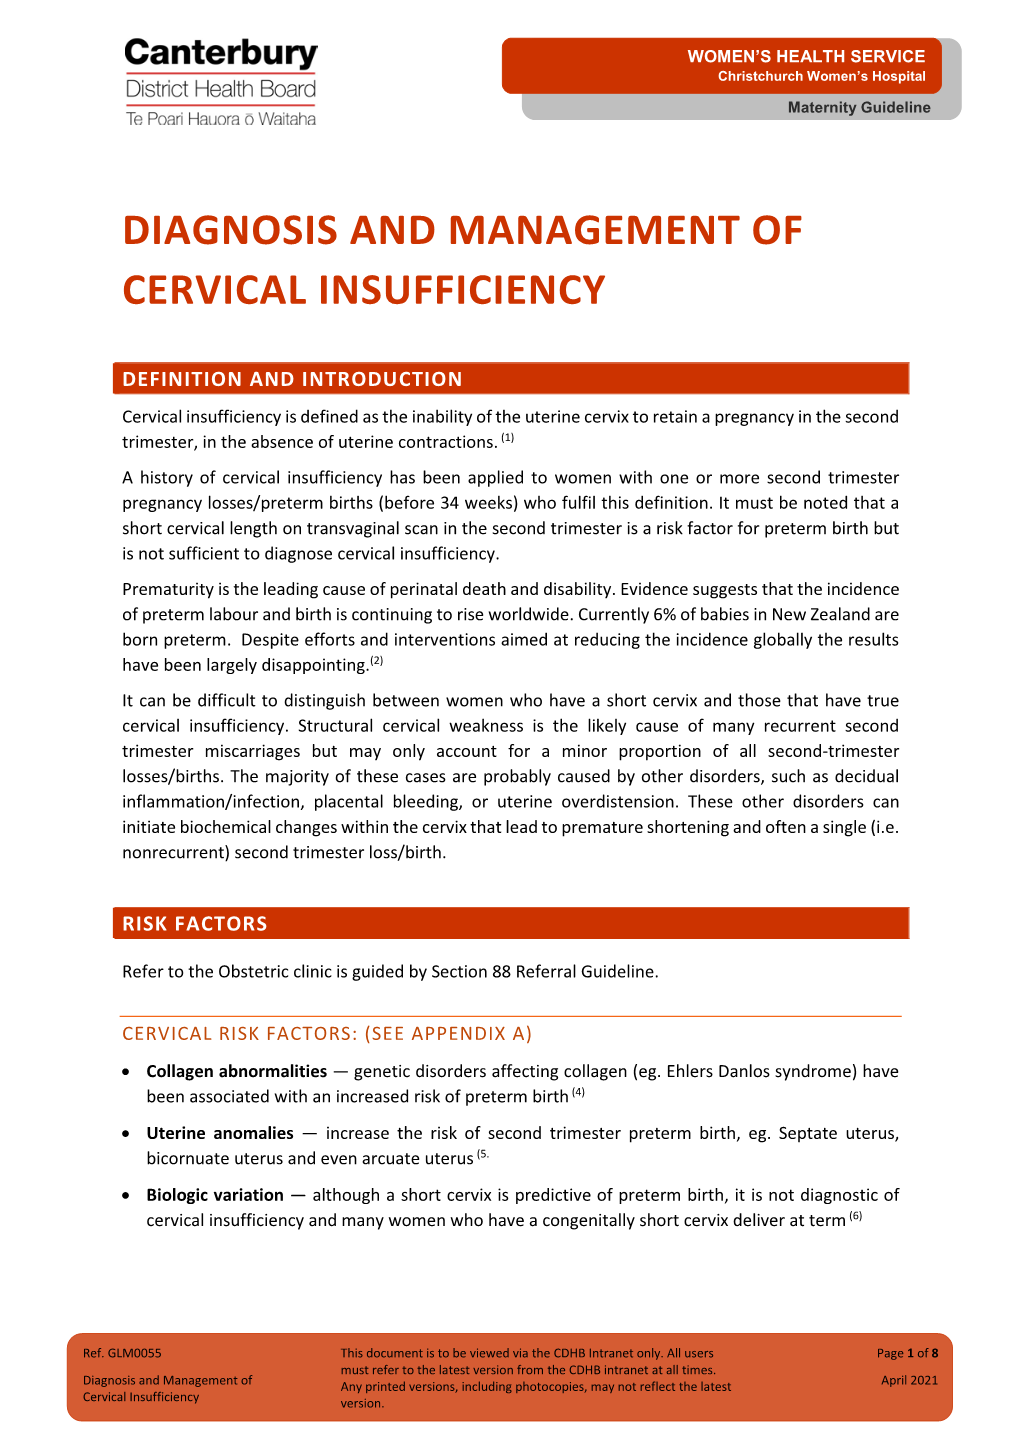 Cervical Insufficiency